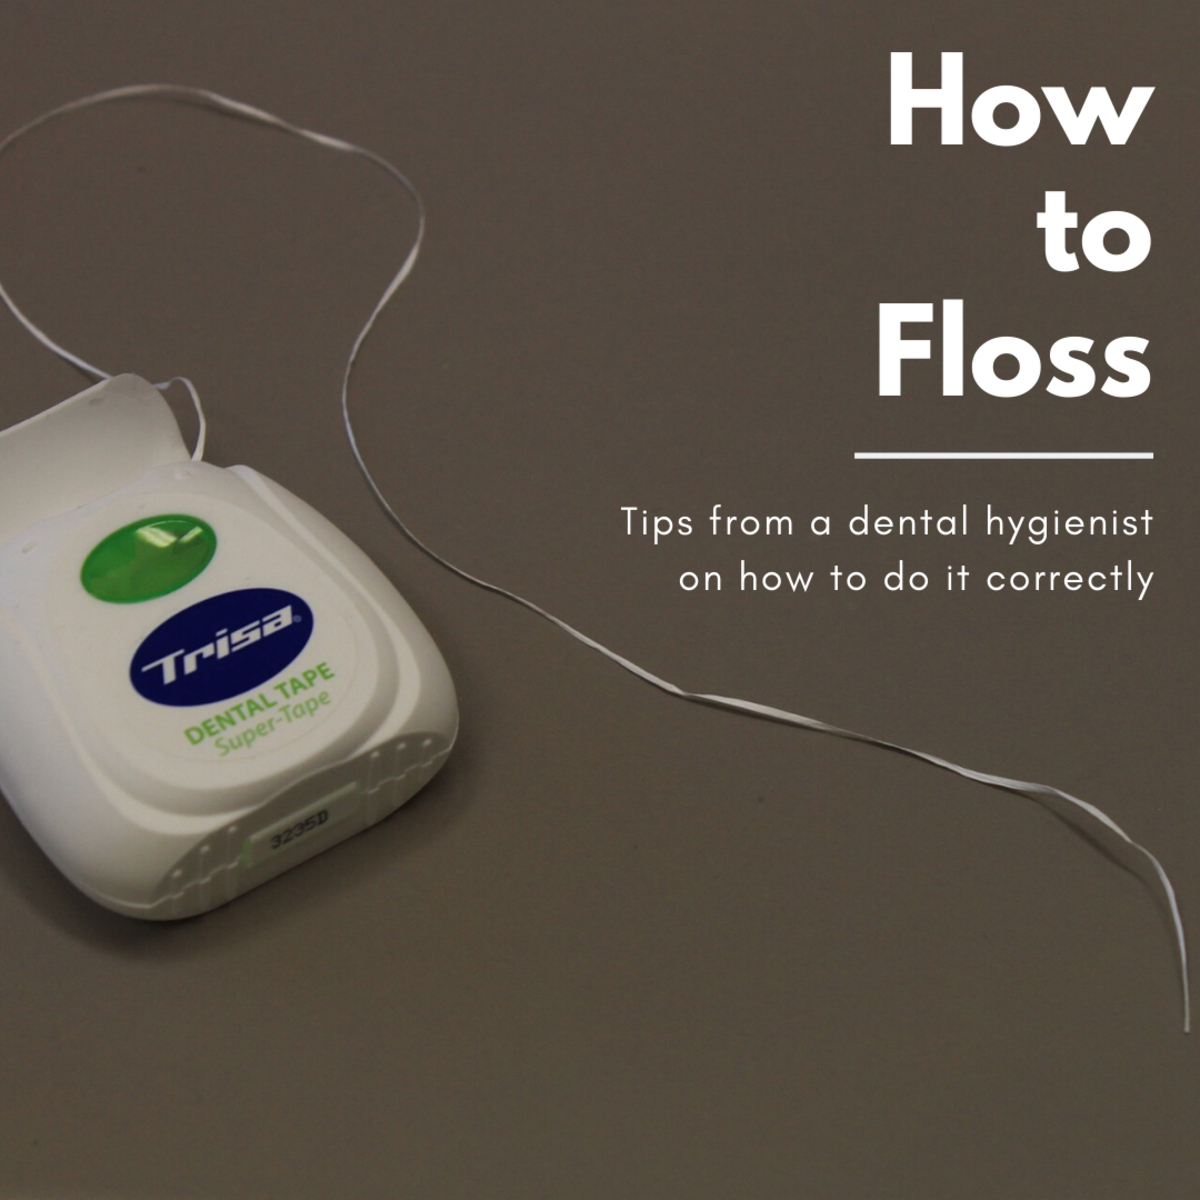 How to Floss Your Teeth Correctly